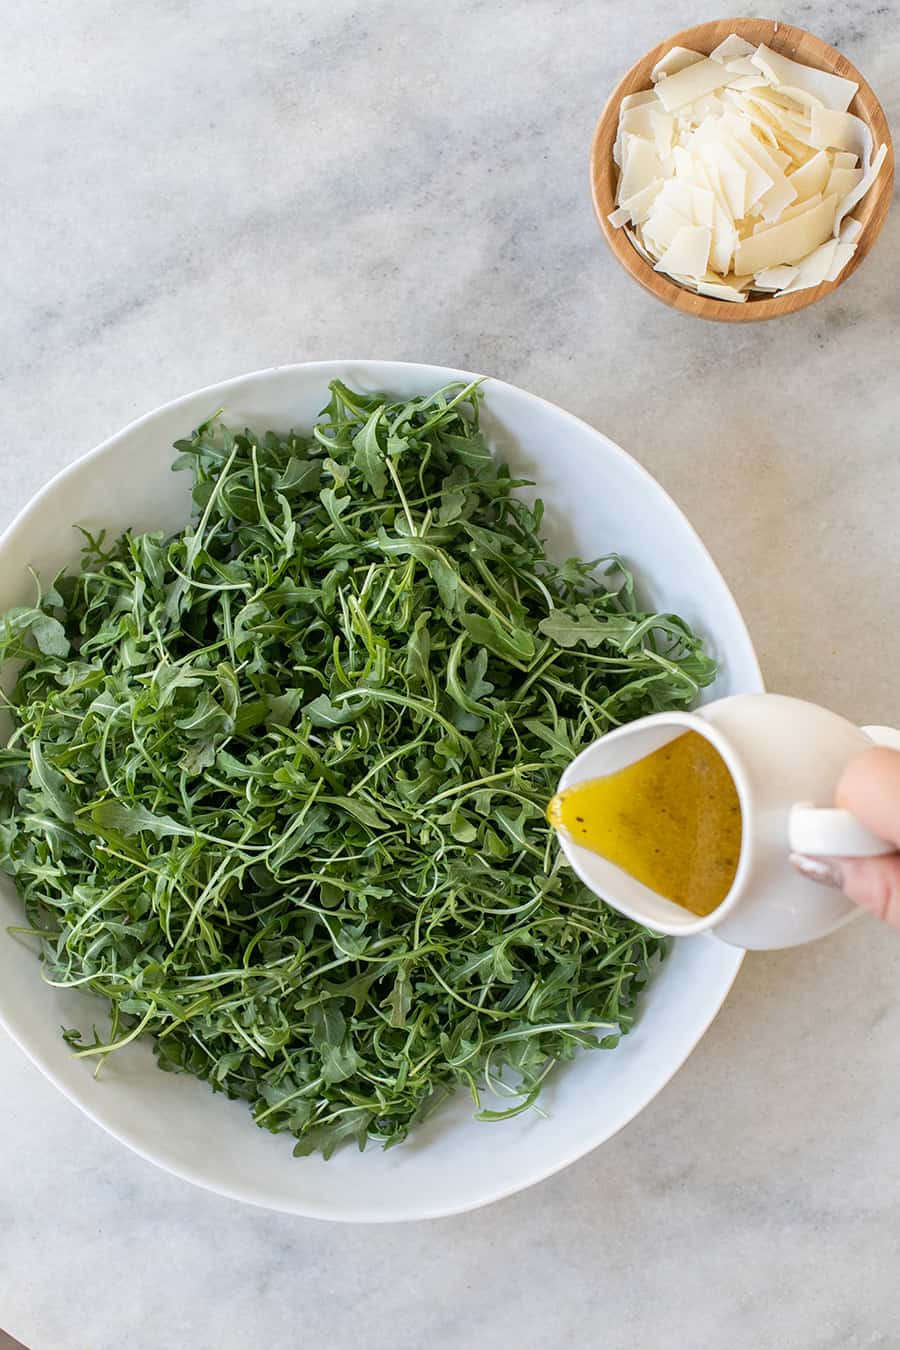 pouring homemade dressing over arugula salad in a white bowl.